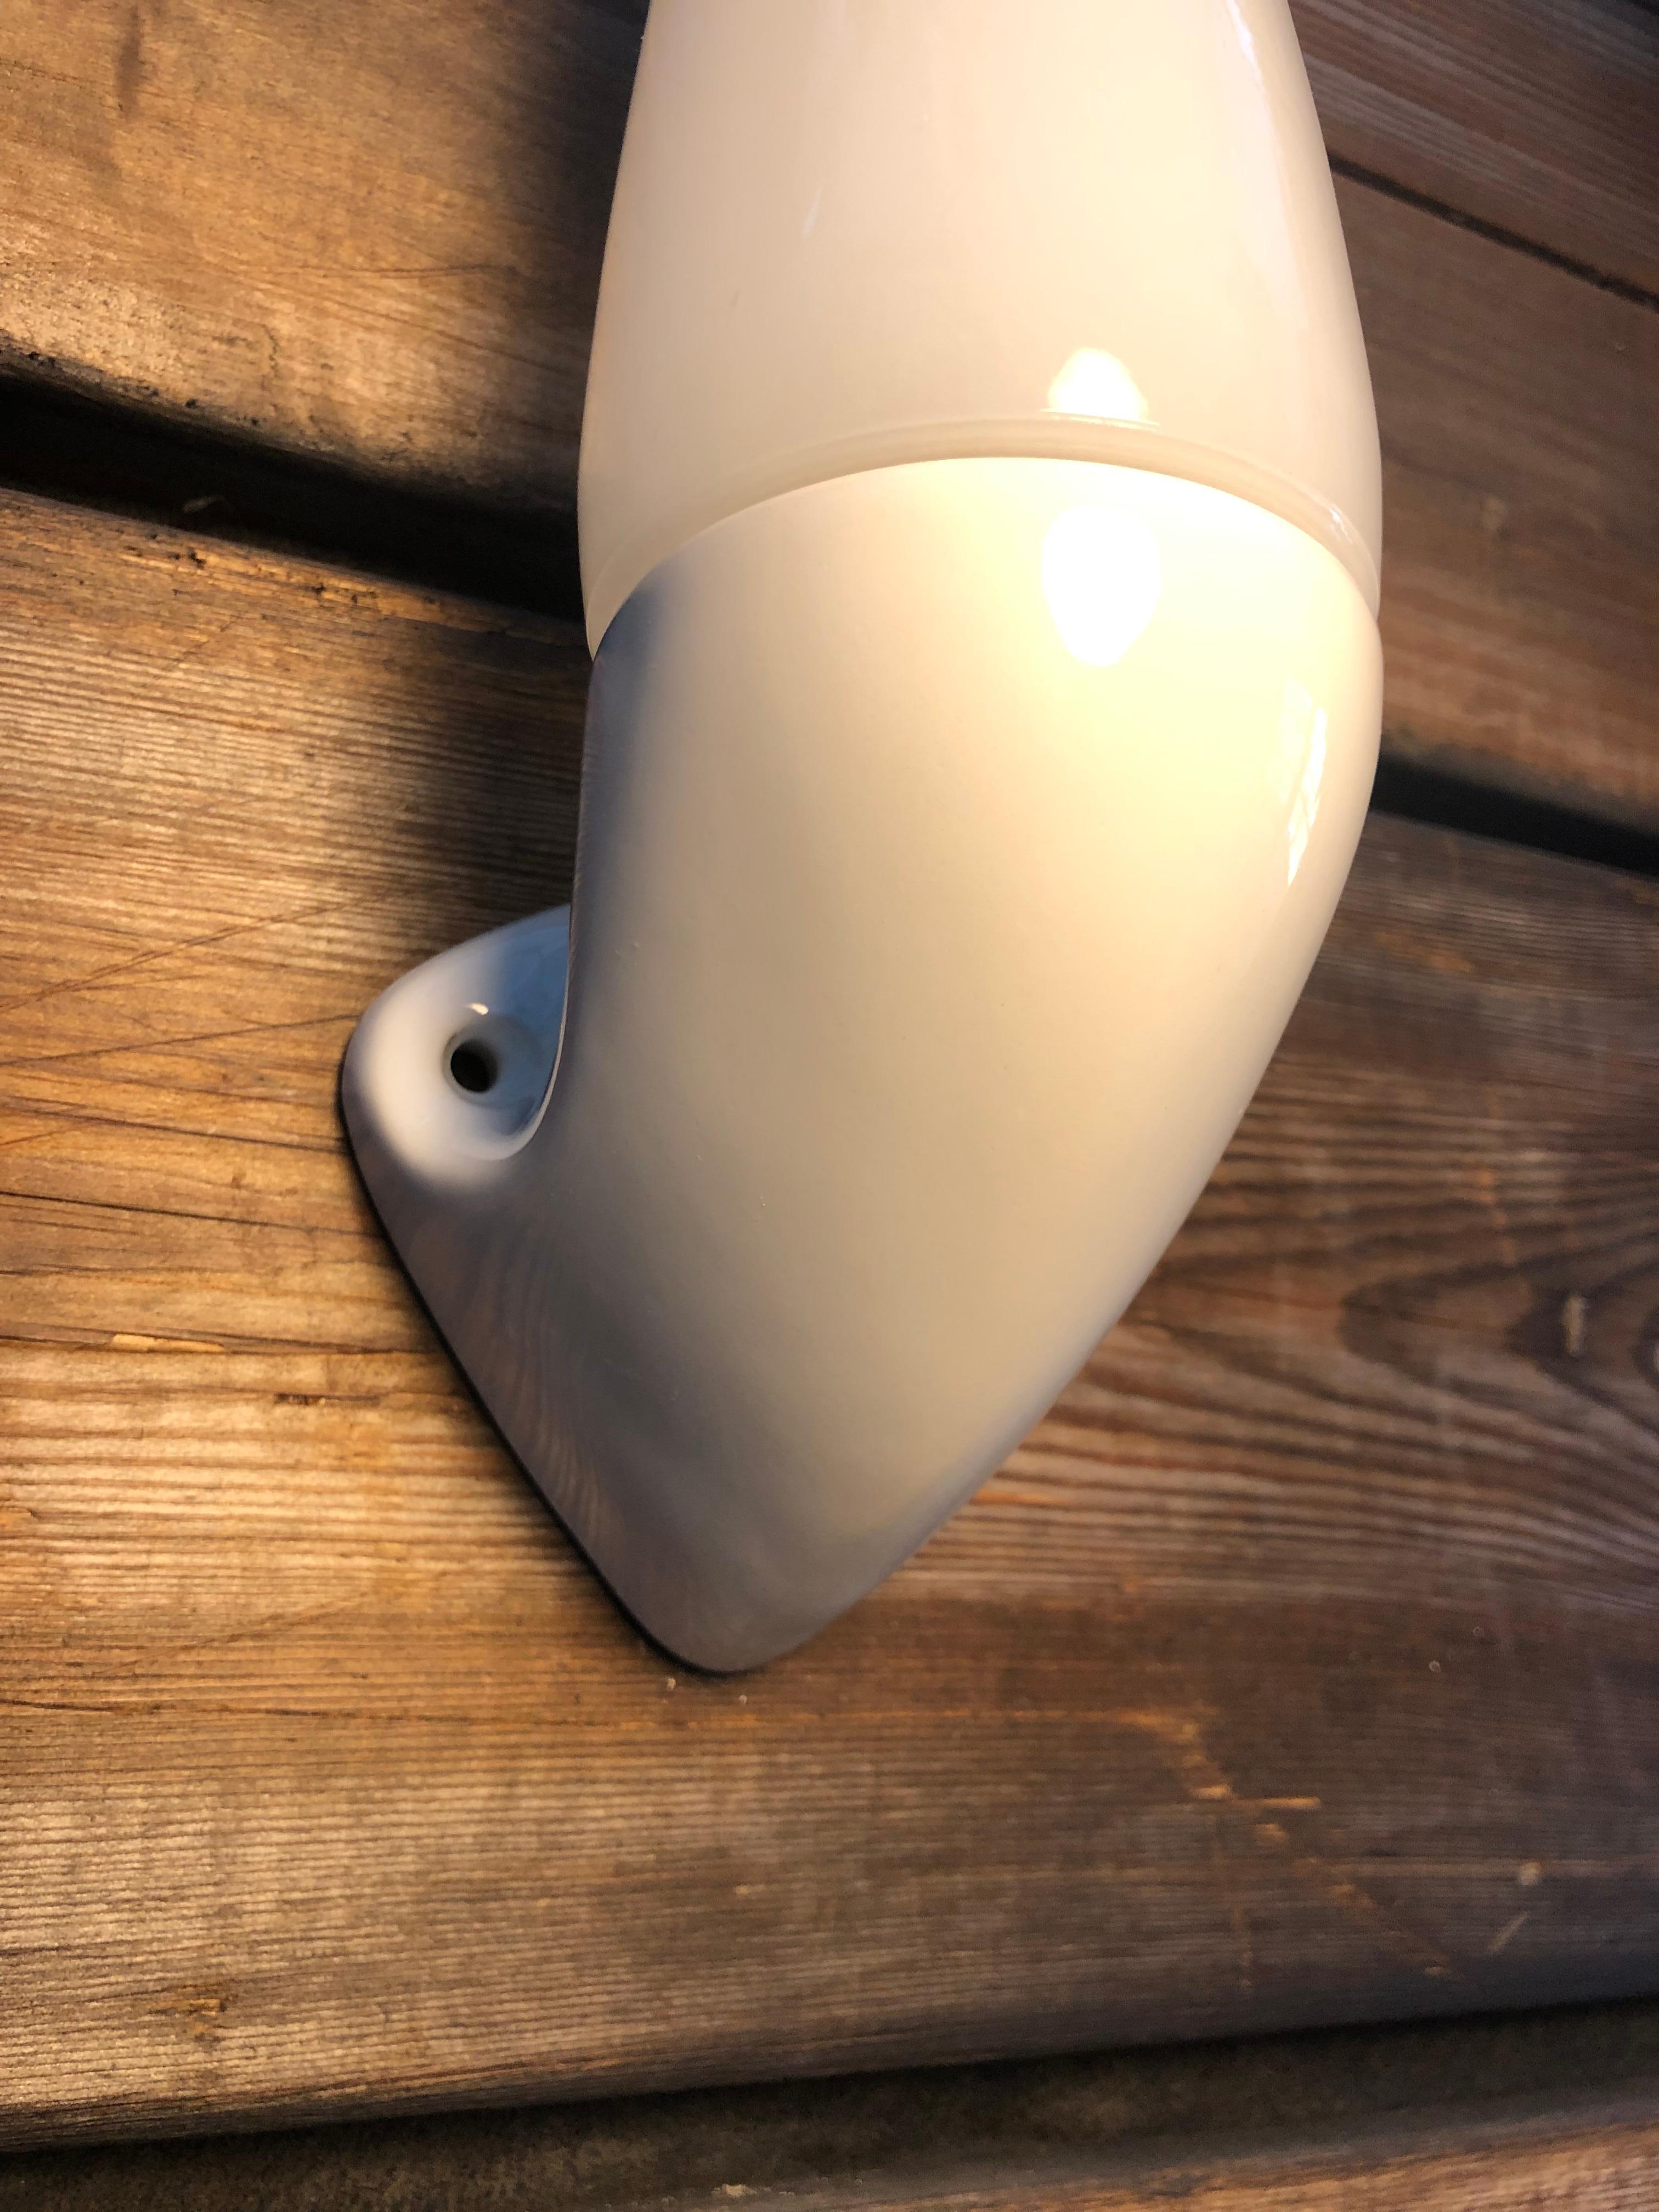 Mid-20th Century Vintage Ifö of Sweden Ceramic Bathroom Lamps with Opaline Shades from the 1960s For Sale